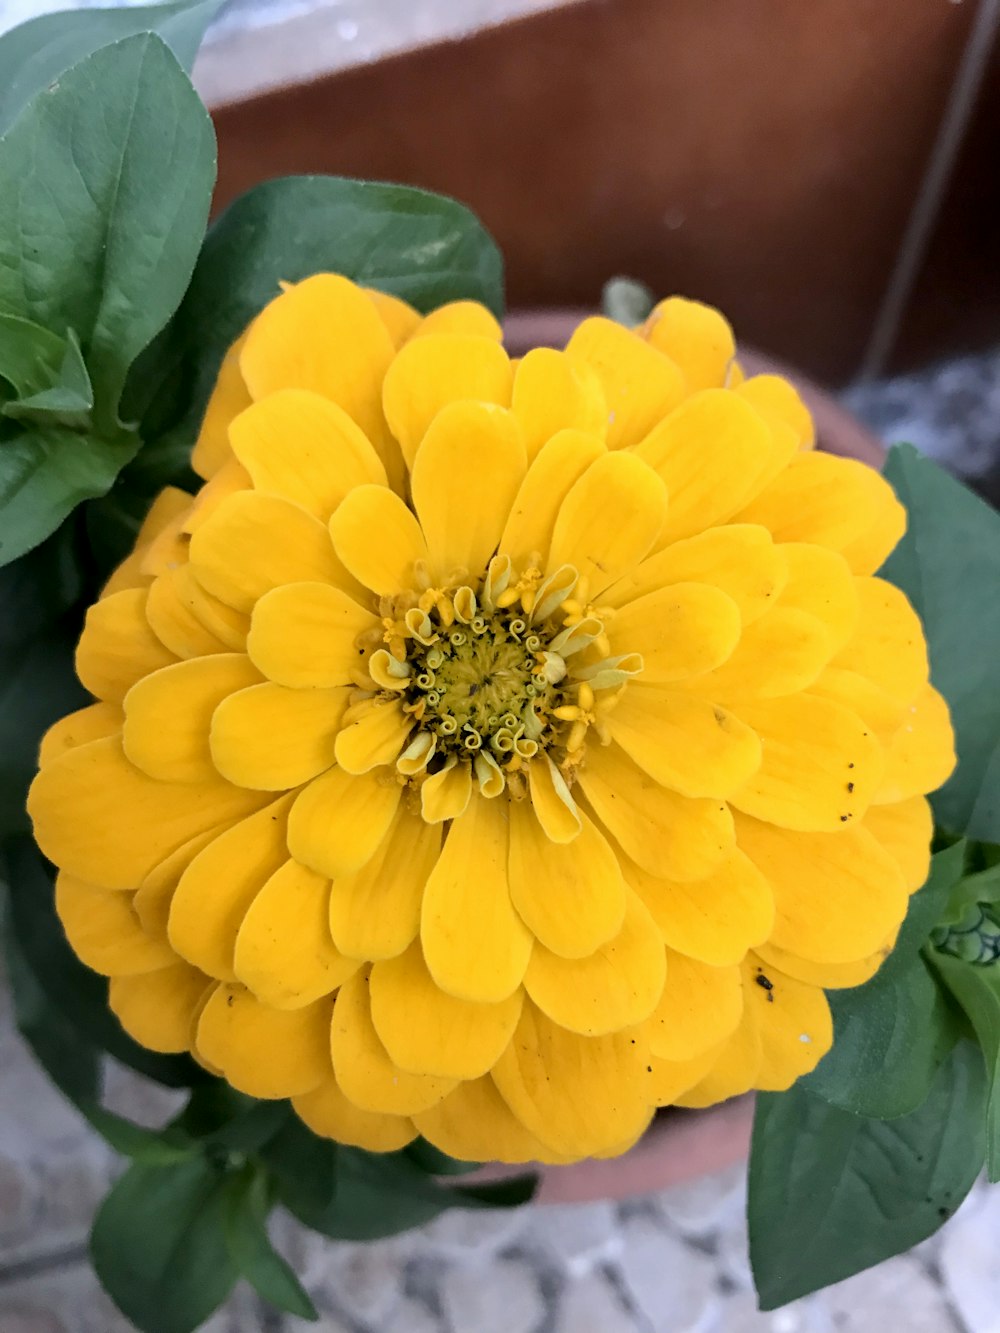 a close up of a yellow flower in a pot